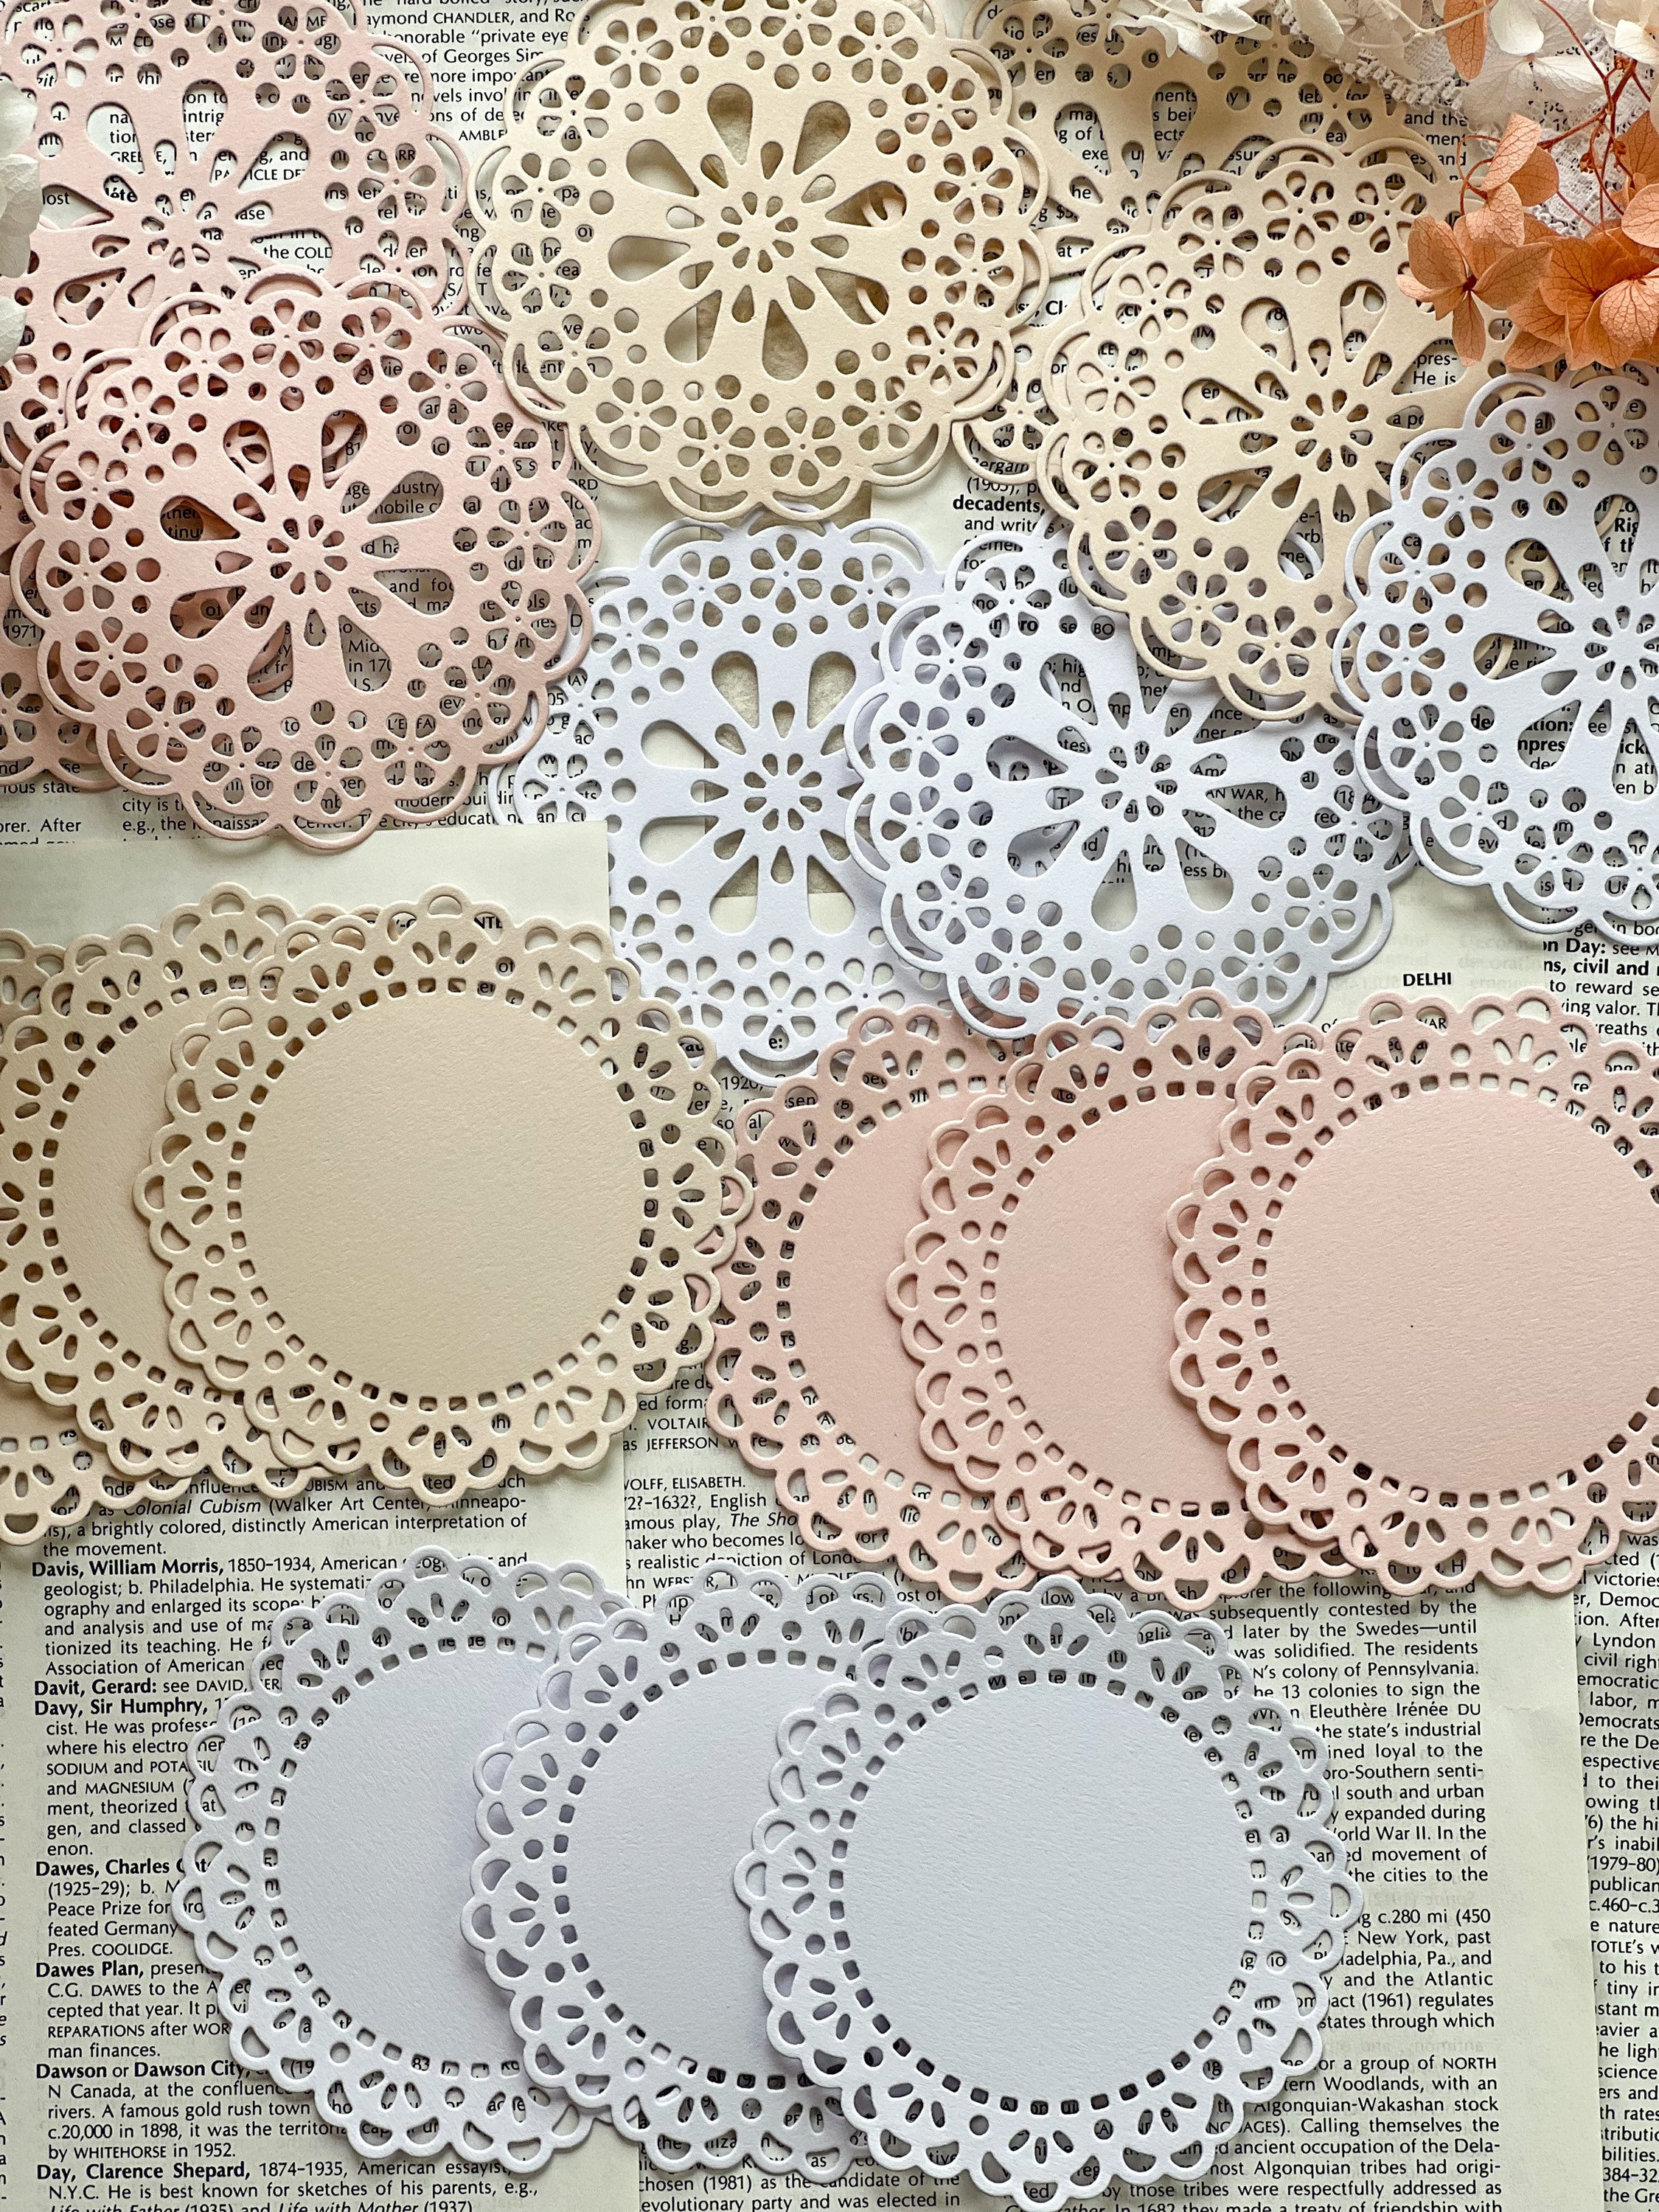 10 pcs VTG 4 INCH OFF WHITE ROUND DAISY FLOWER EMBOSSED PAPER DOILY USA  CARDS